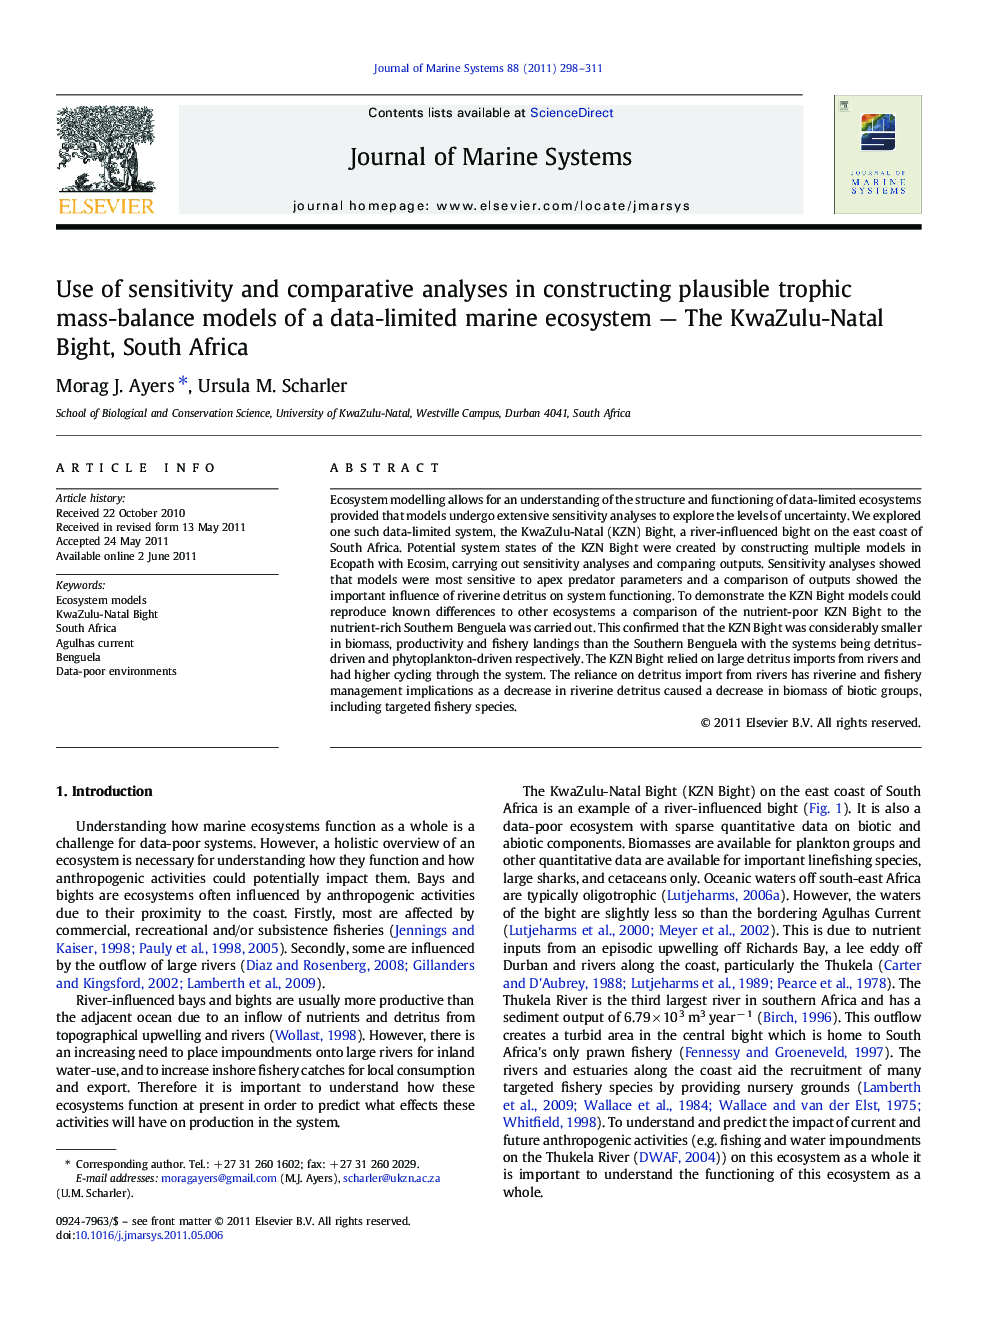 Use of sensitivity and comparative analyses in constructing plausible trophic mass-balance models of a data-limited marine ecosystem - The KwaZulu-Natal Bight, South Africa